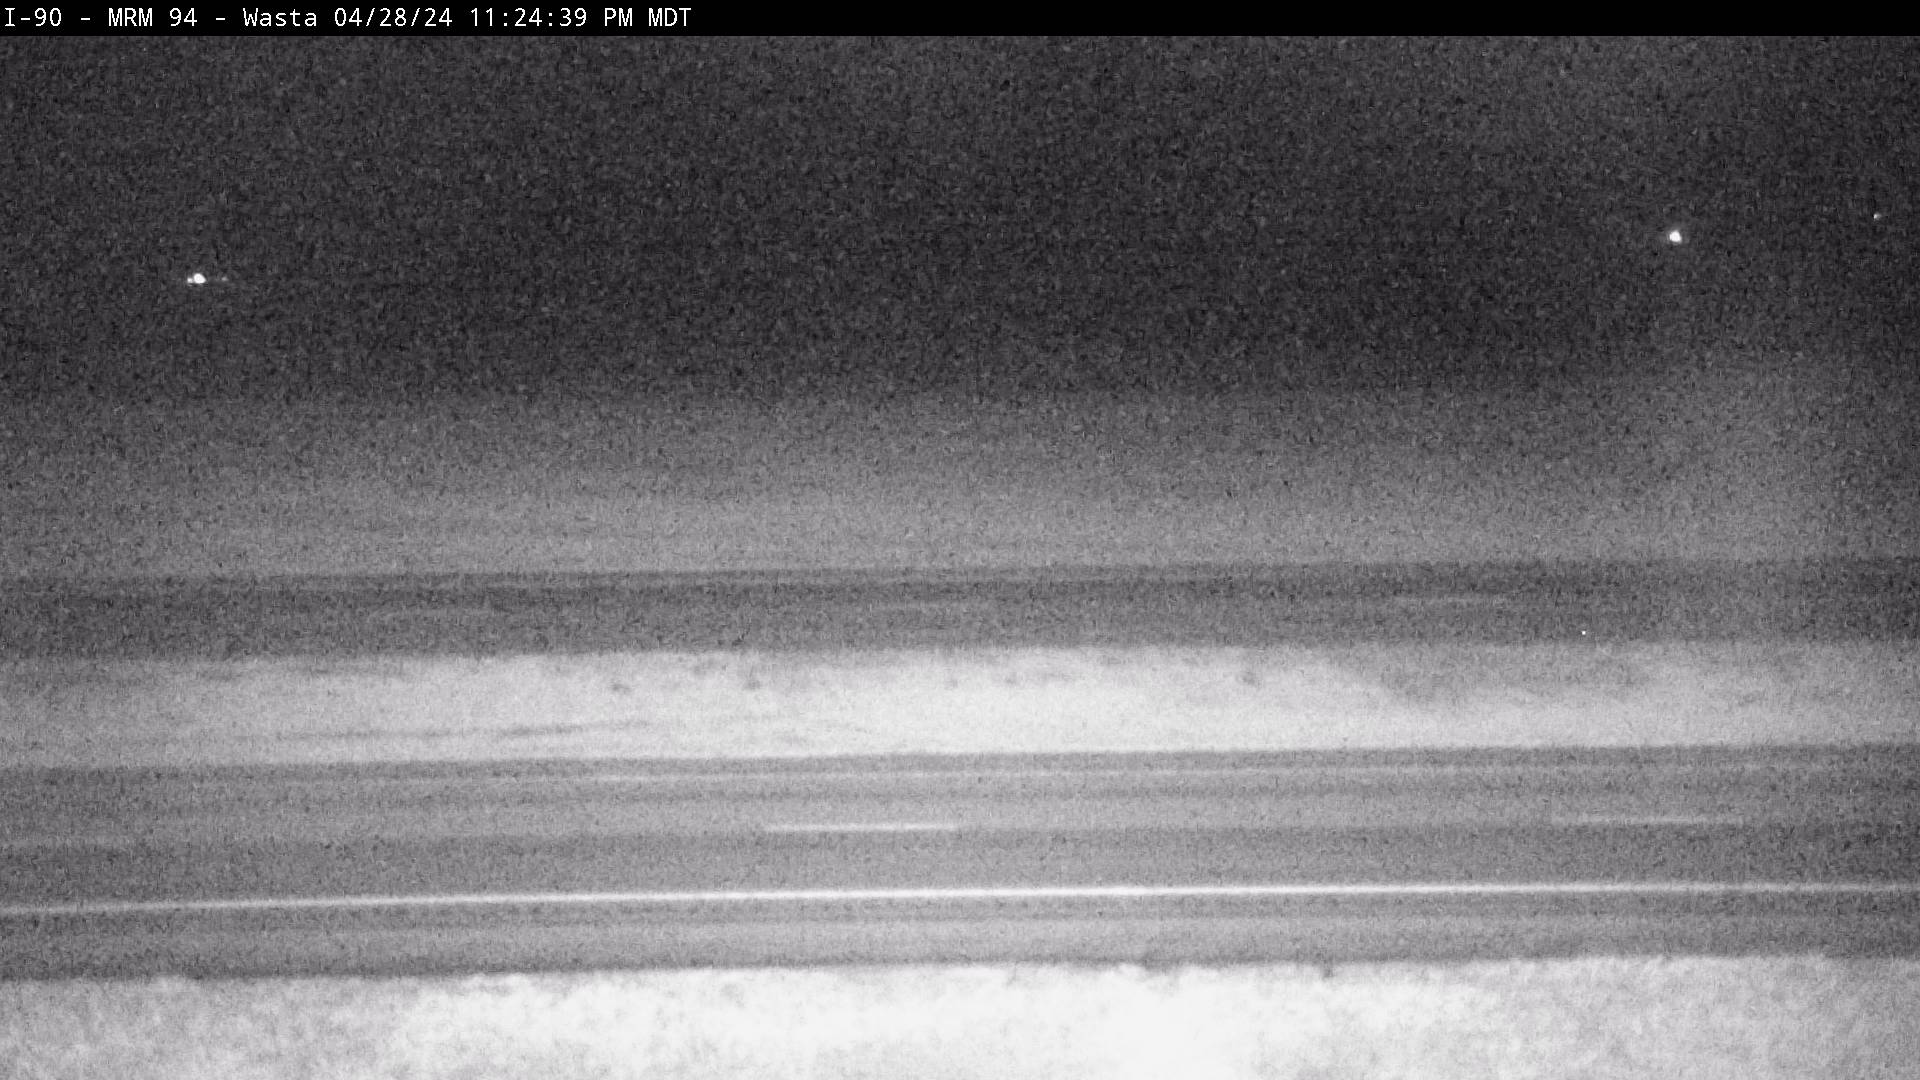 West of town along I-90 @ MP 94.6 - North Traffic Camera